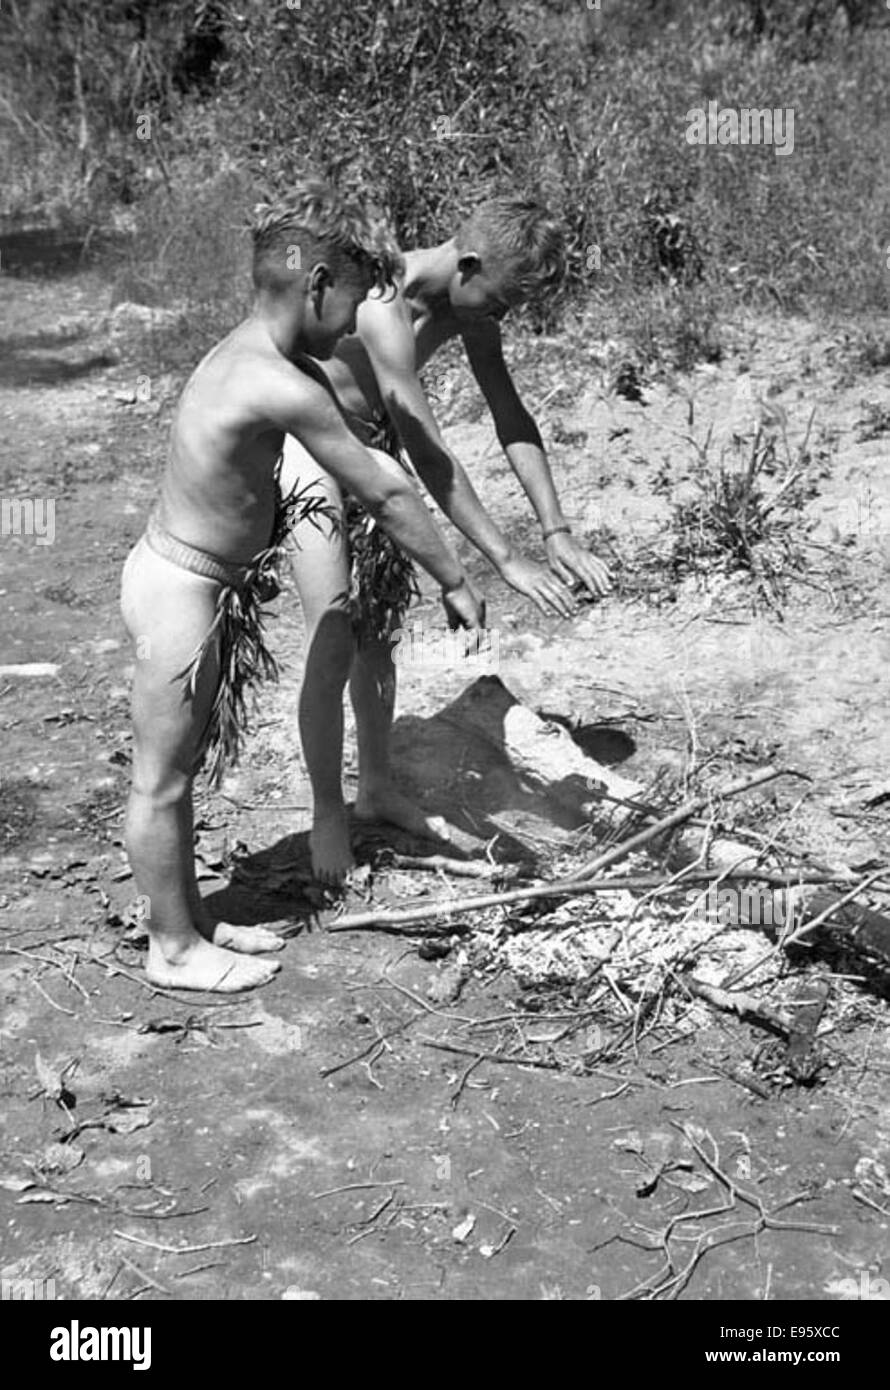 Two boys dressed in ‘loin cloths' play by the fire (ACROSS THE RIVER) 2 July 1948 21/4 x 31/4 negative This is one of 54 photos in the album “Fort Macleod’s Anonymous”. Most are shot in Fort Macleod, Alberta in Stock Photo